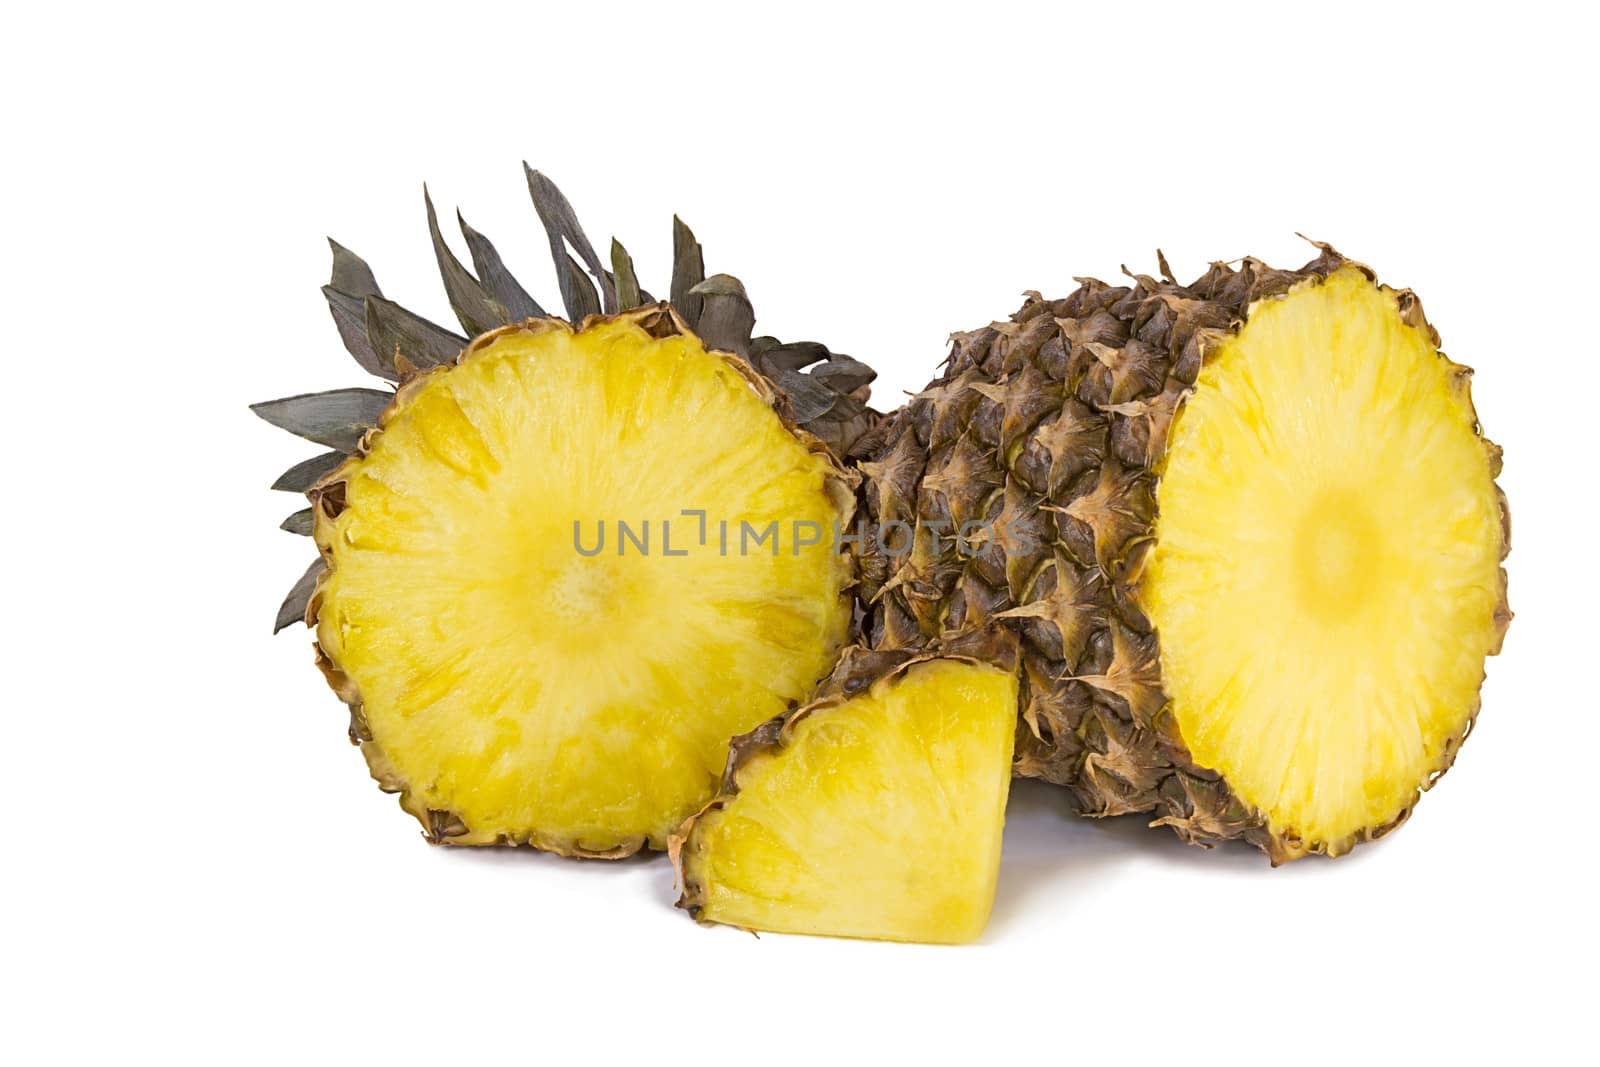 Pineapple and slices of pineapple on a white background. by georgina198